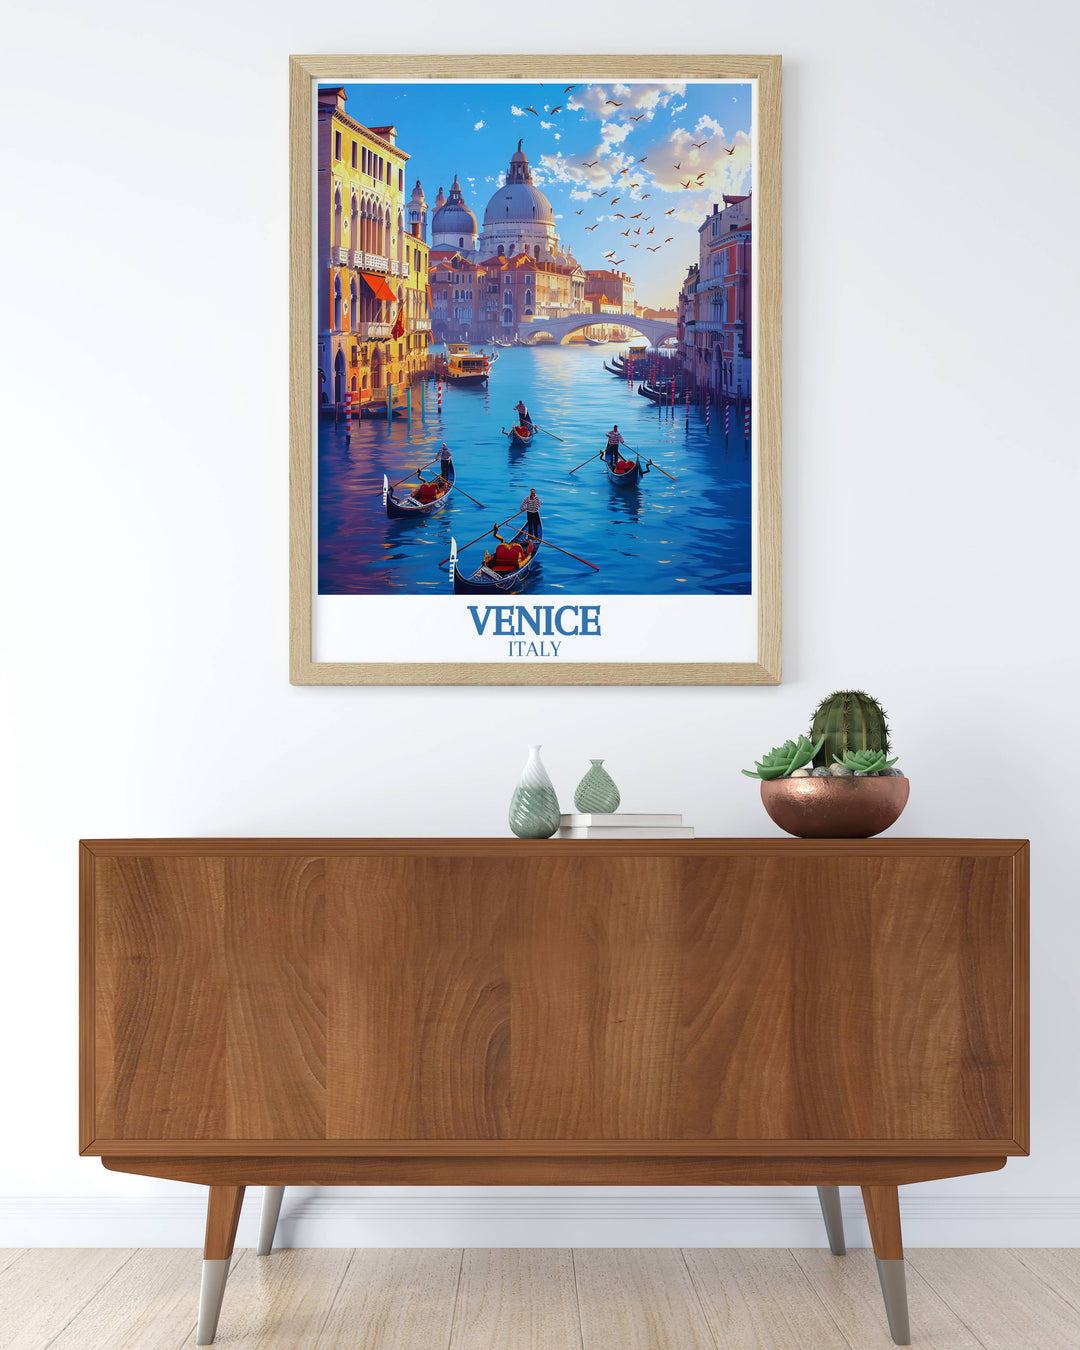 Detailed Grand Canal art print capturing the essence of Venices most famous waterway, with gondolas gliding under centuries old bridges and stunning architecture along the canal, making it a perfect addition to any home decor.